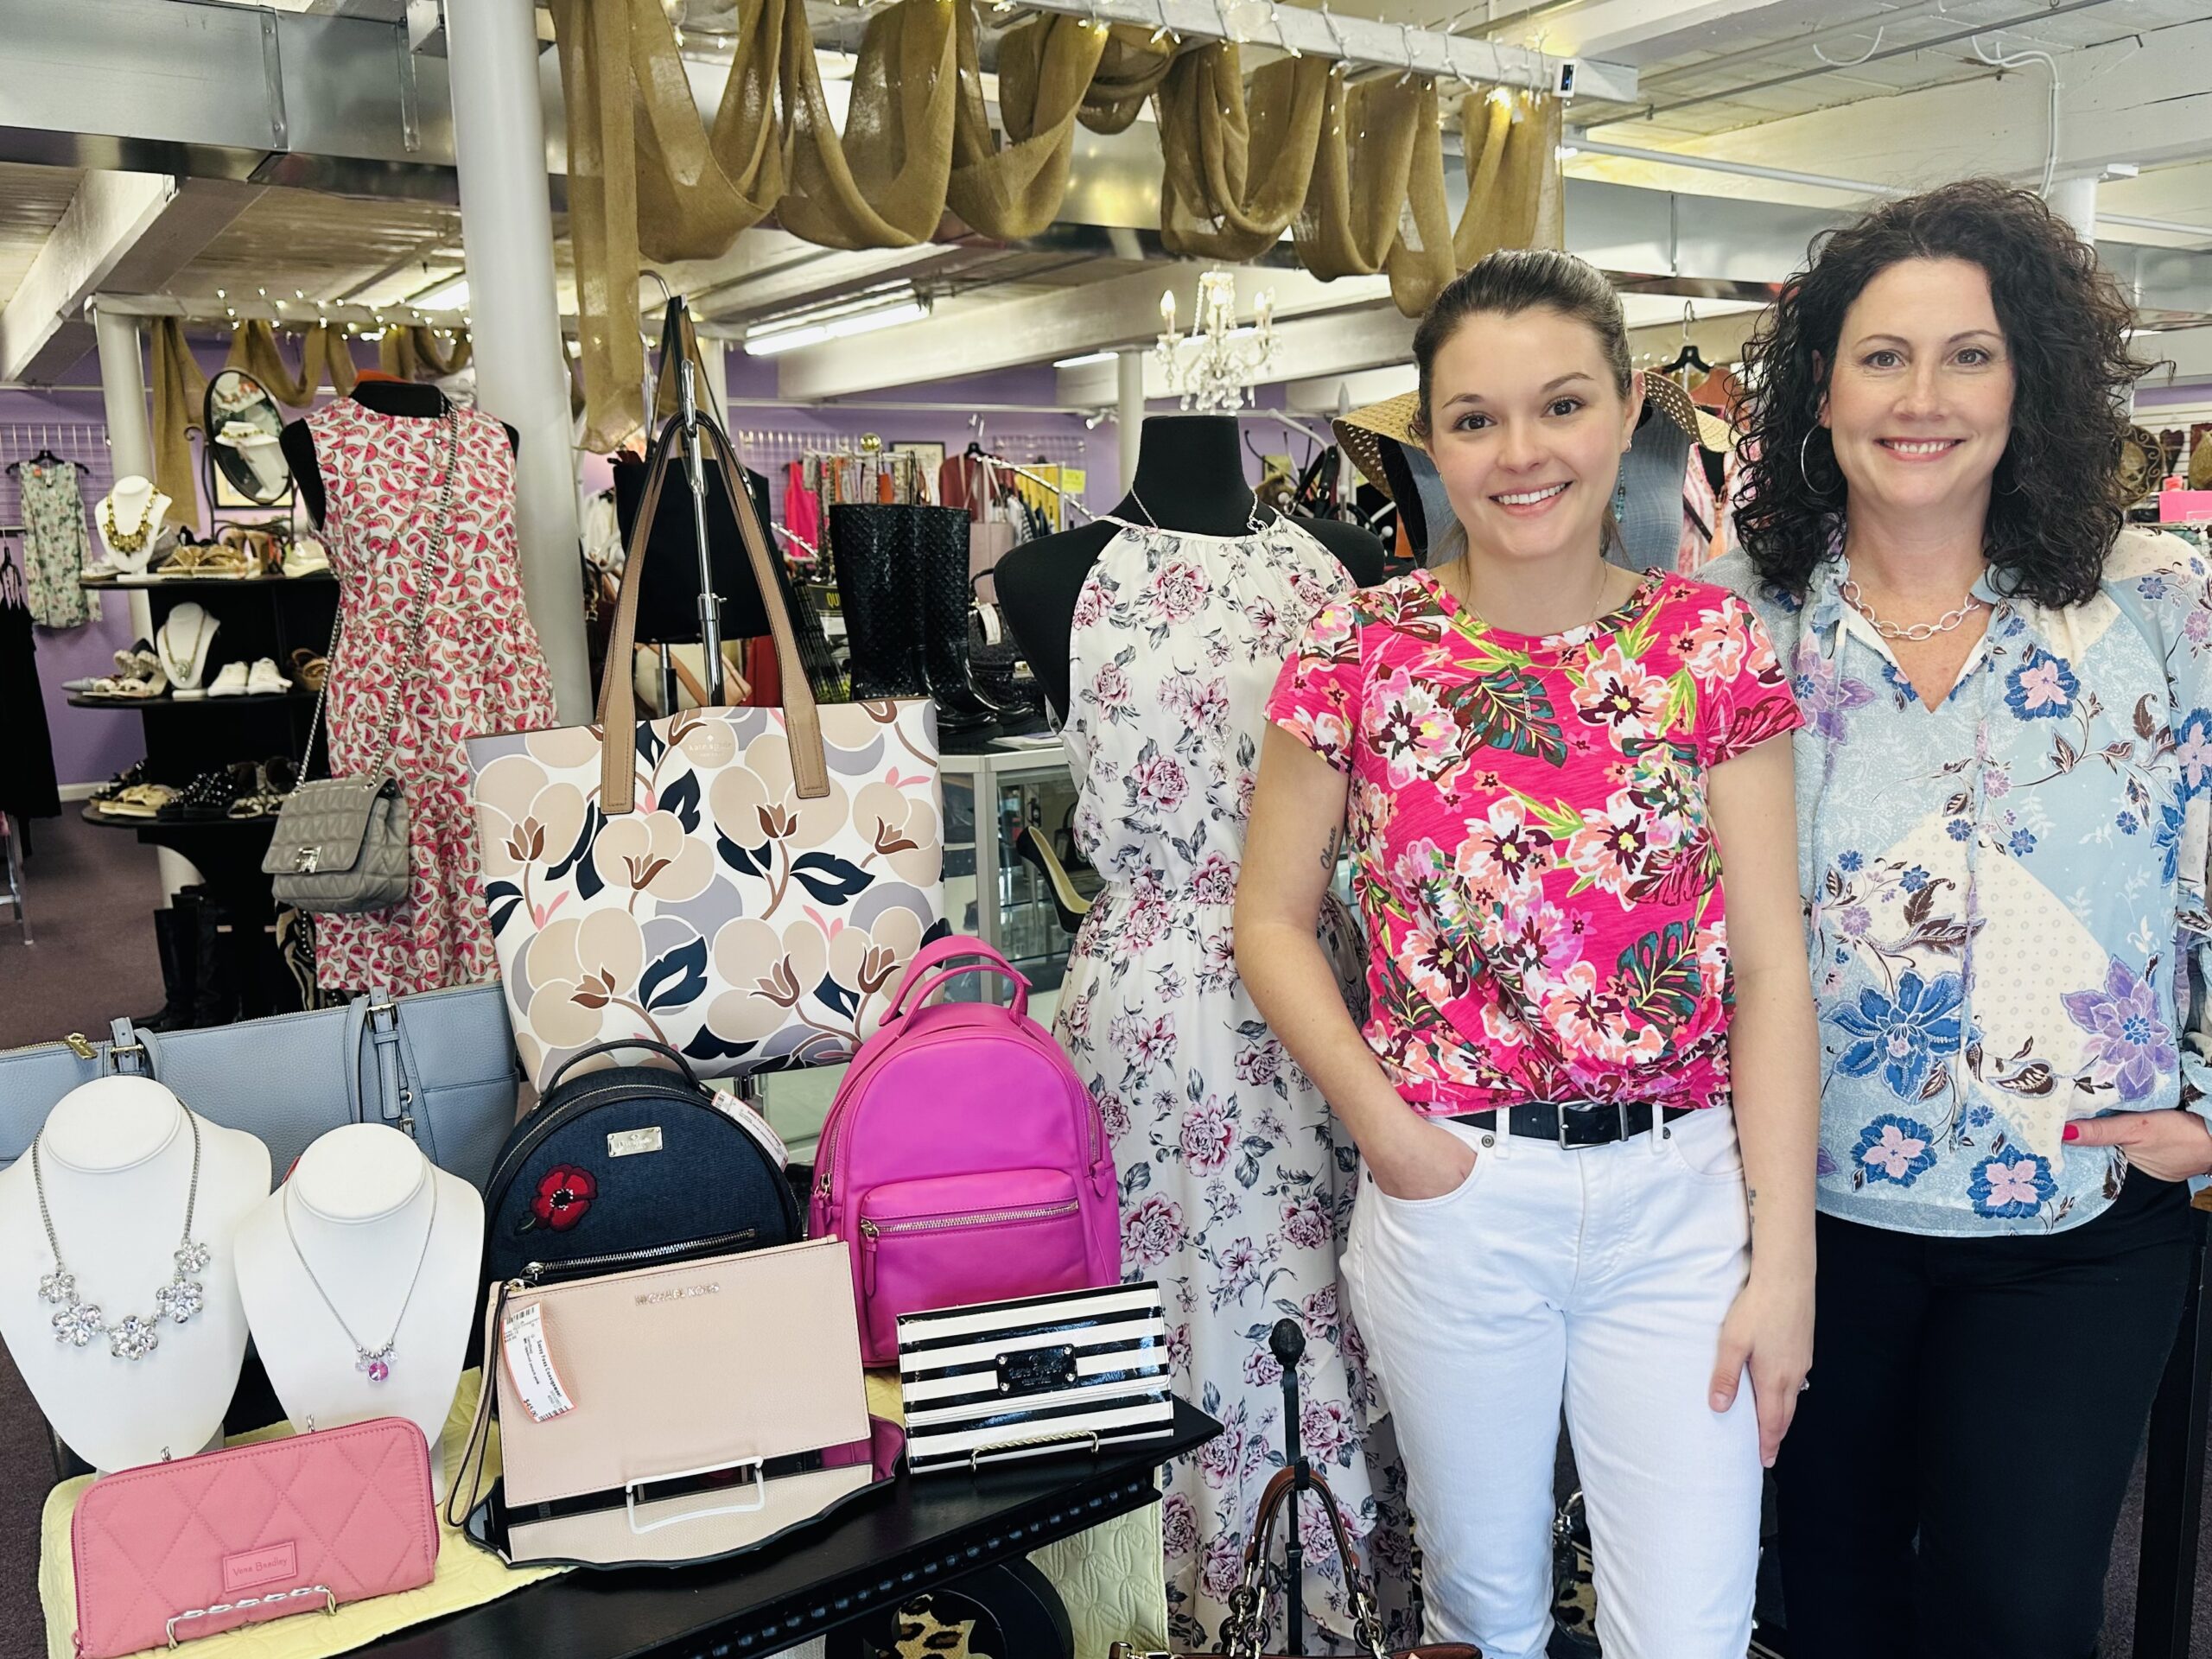 Business Profile: Sassy Foxx consignment shop features high-end items at accessible prices